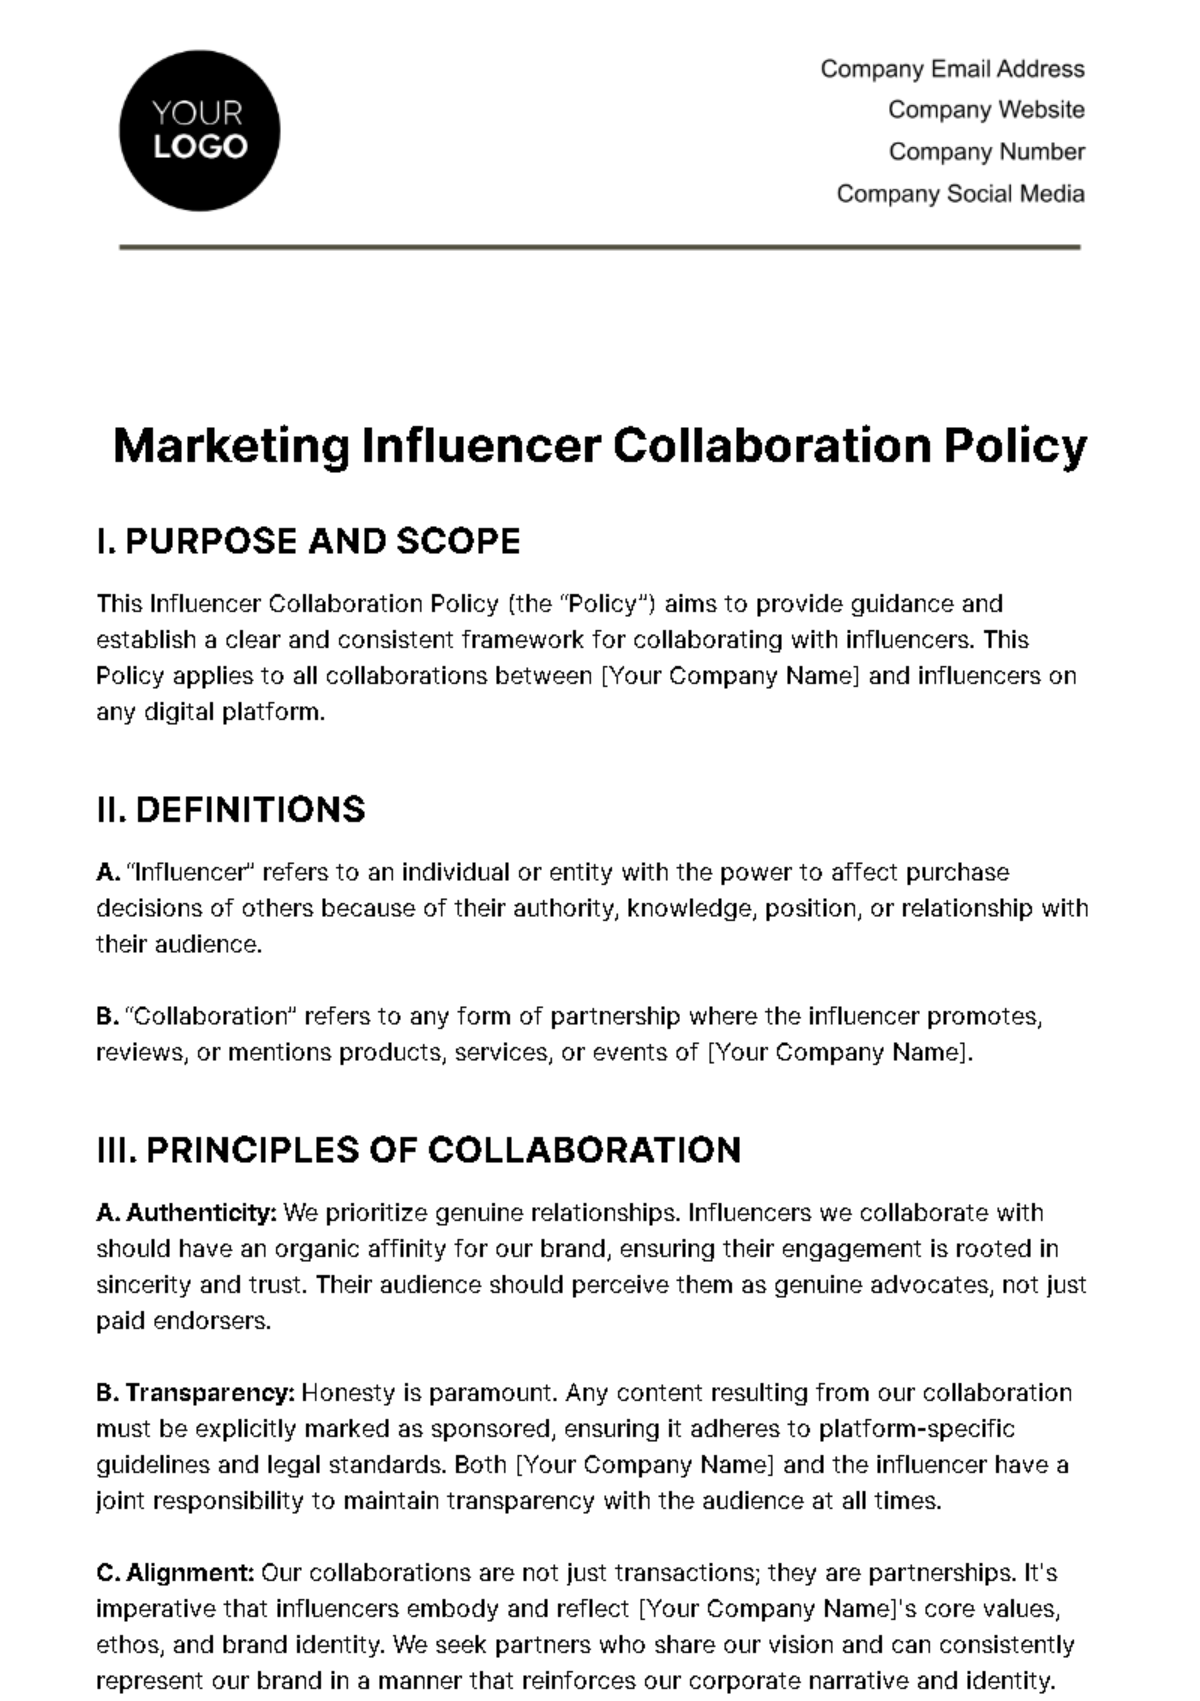 Free Marketing Influencer Collaboration Policy Template